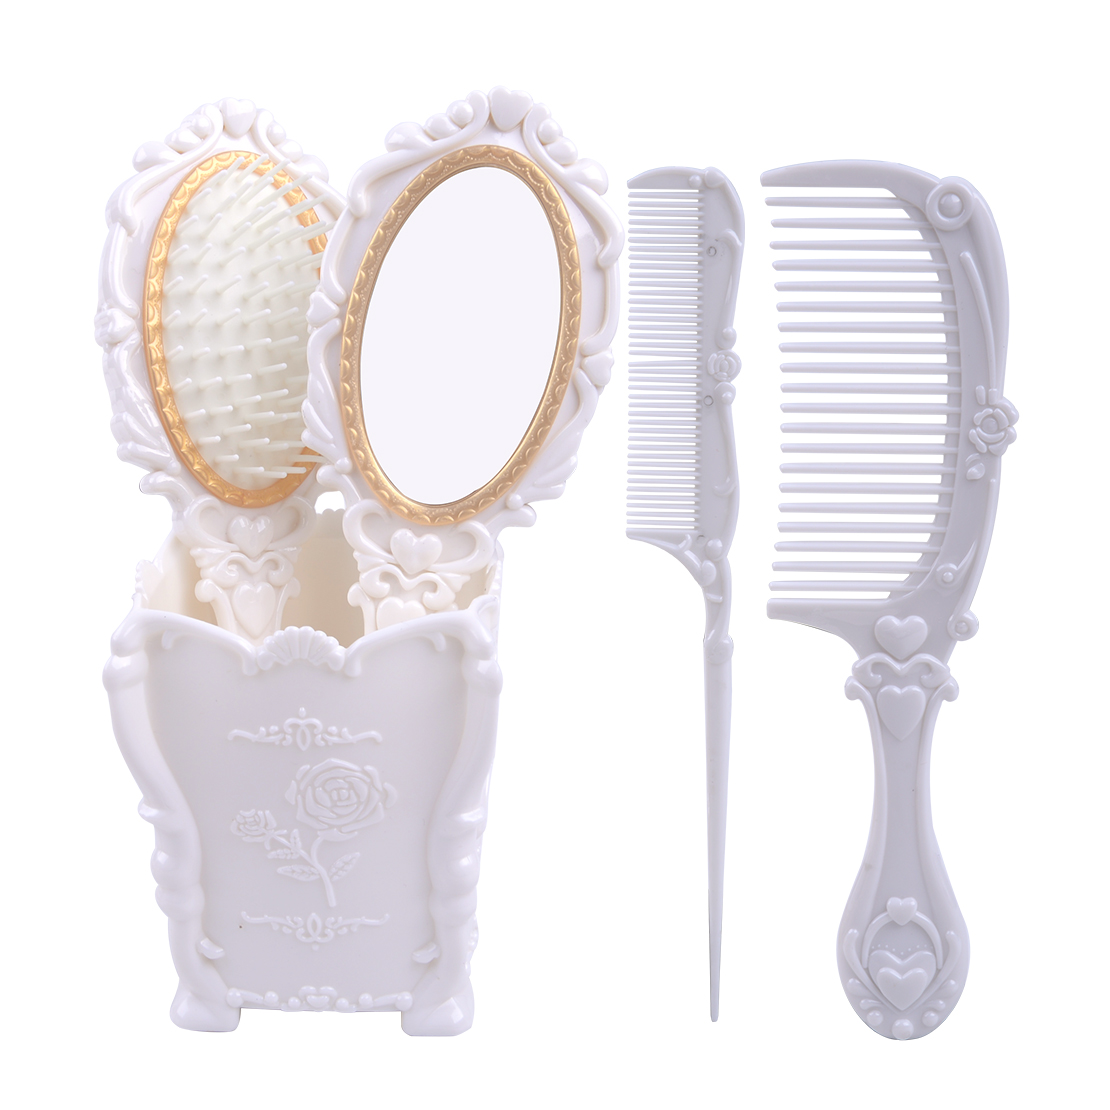 4x Daily Use Hair Comb Brush Set Fit For Women Girls Ladies With ...